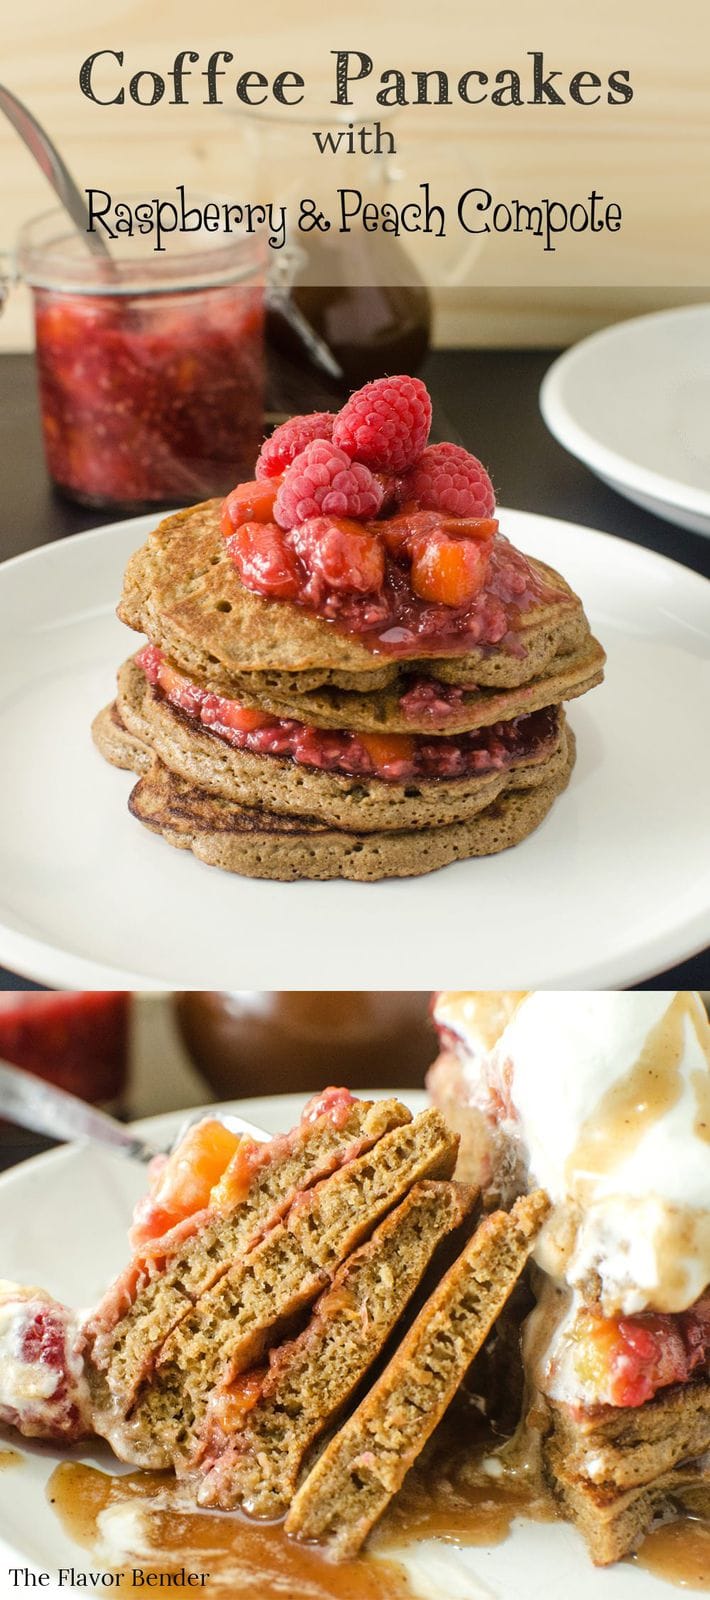 Coffee Pancakes with Peach & Raspberry compote & topped with Brown butter butterscotch sauce! Fluffy, light, delicious, pancakes with amazing depth of flavor.